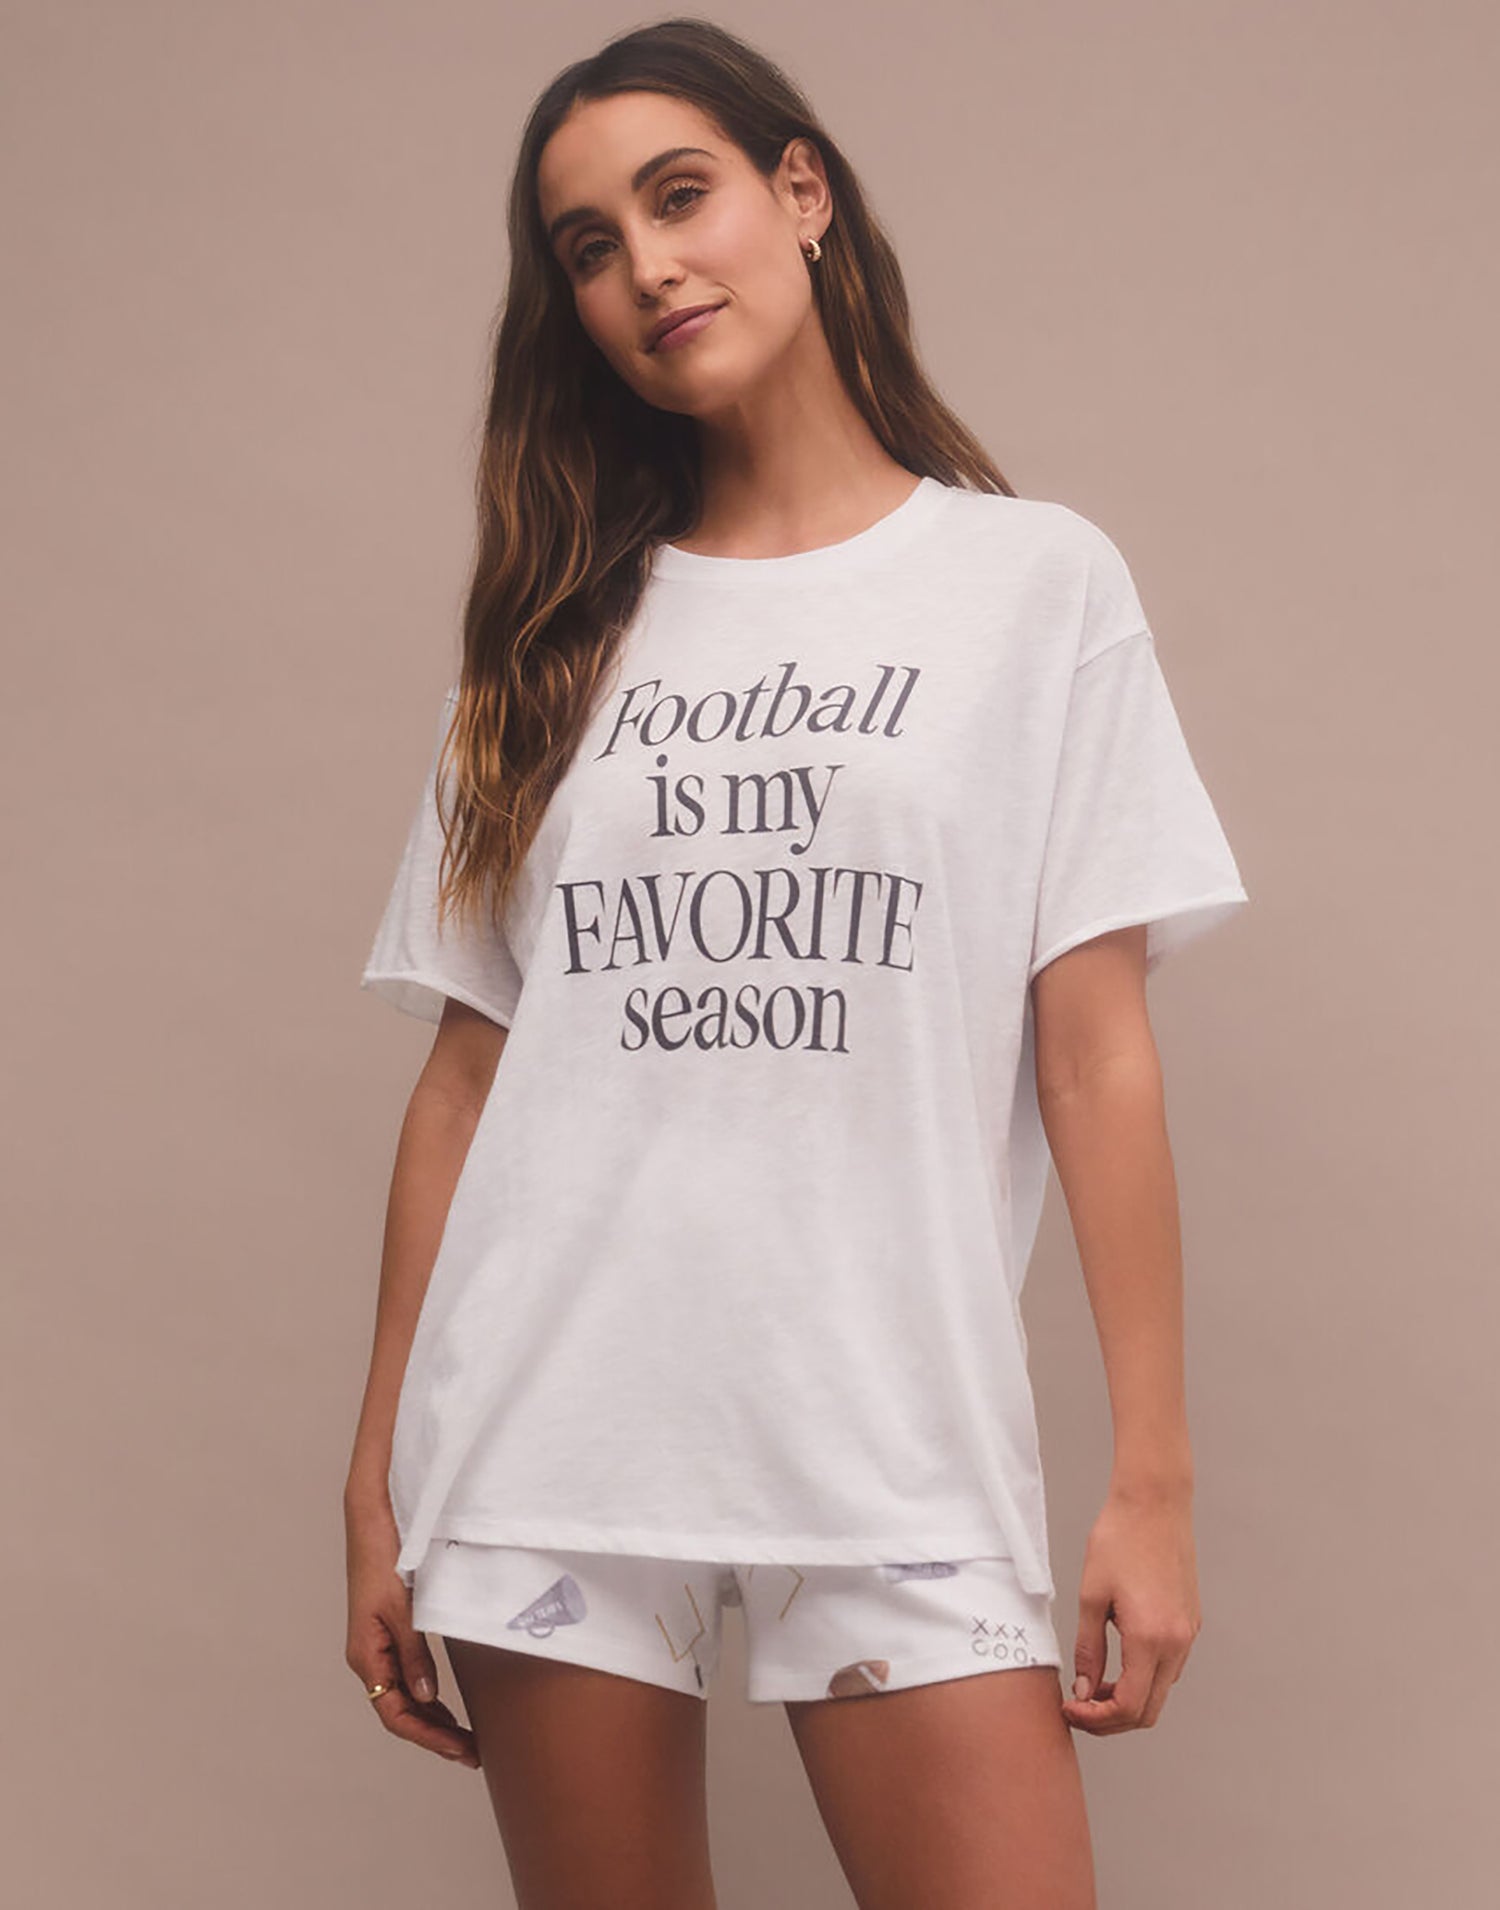 Boyfriend Football Tee by Z Supply in White - Front View